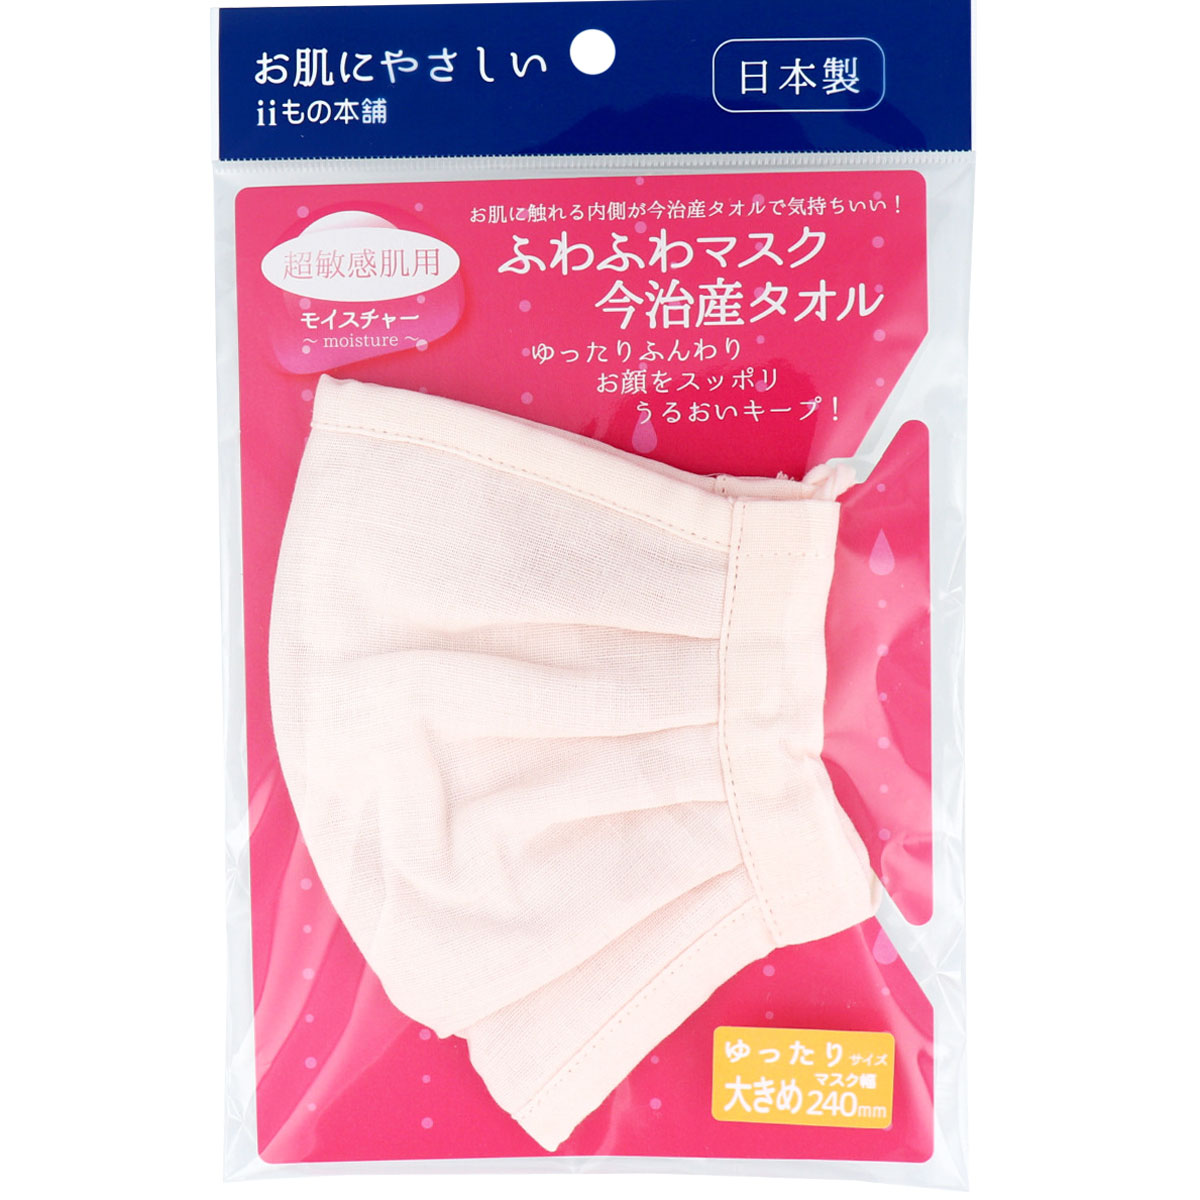 Picture of Light Pink color Fluffy Mask Using Imabari Towel